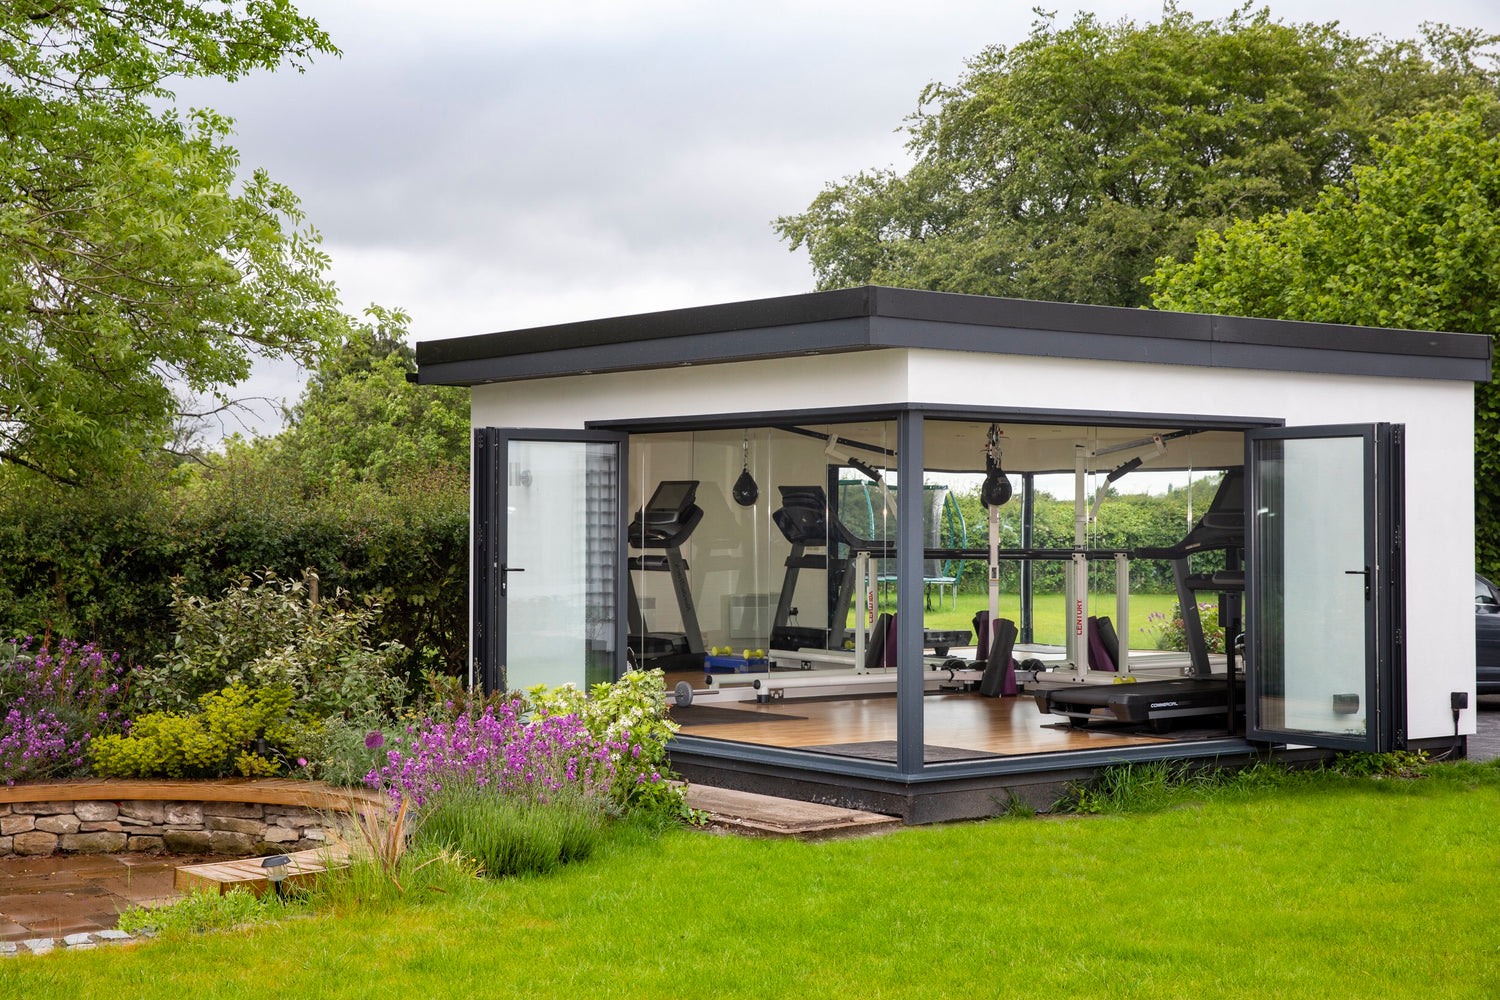 A garden room office in Stockport with gym and mirrored walls